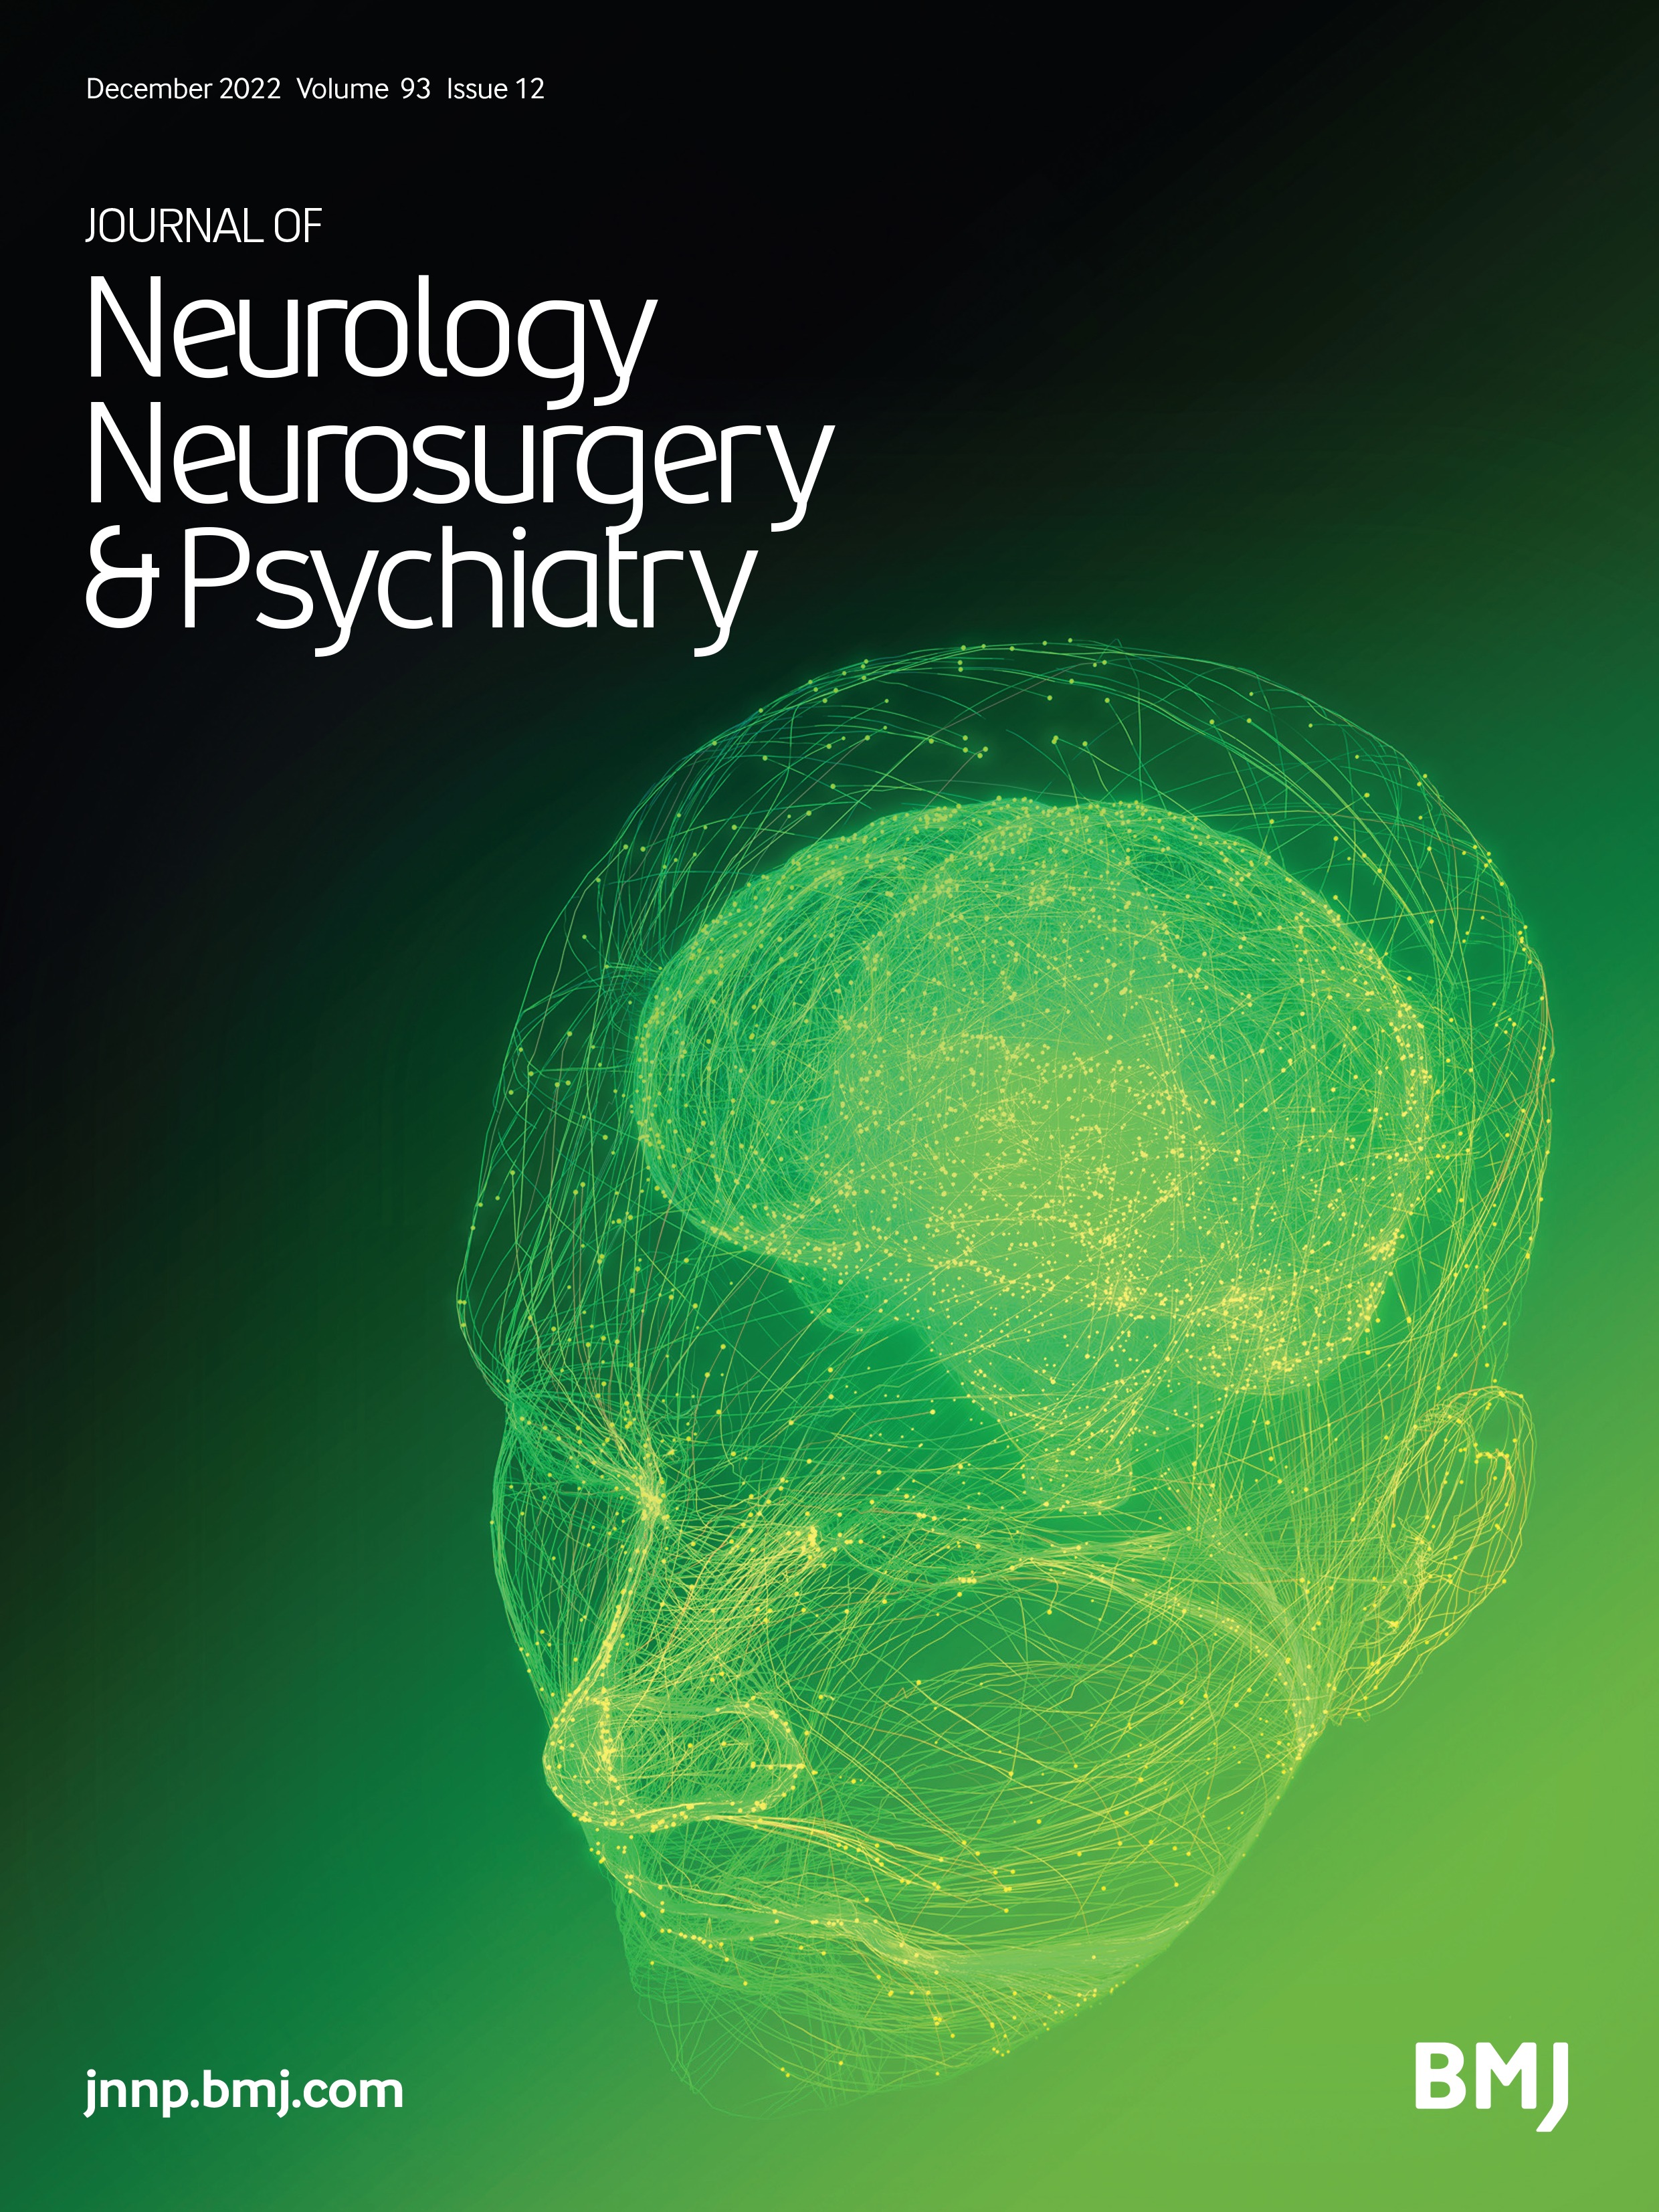 37 The medicolegal challenges in neuropsychiatry: an evaluation of mental capacity and legal frameworks